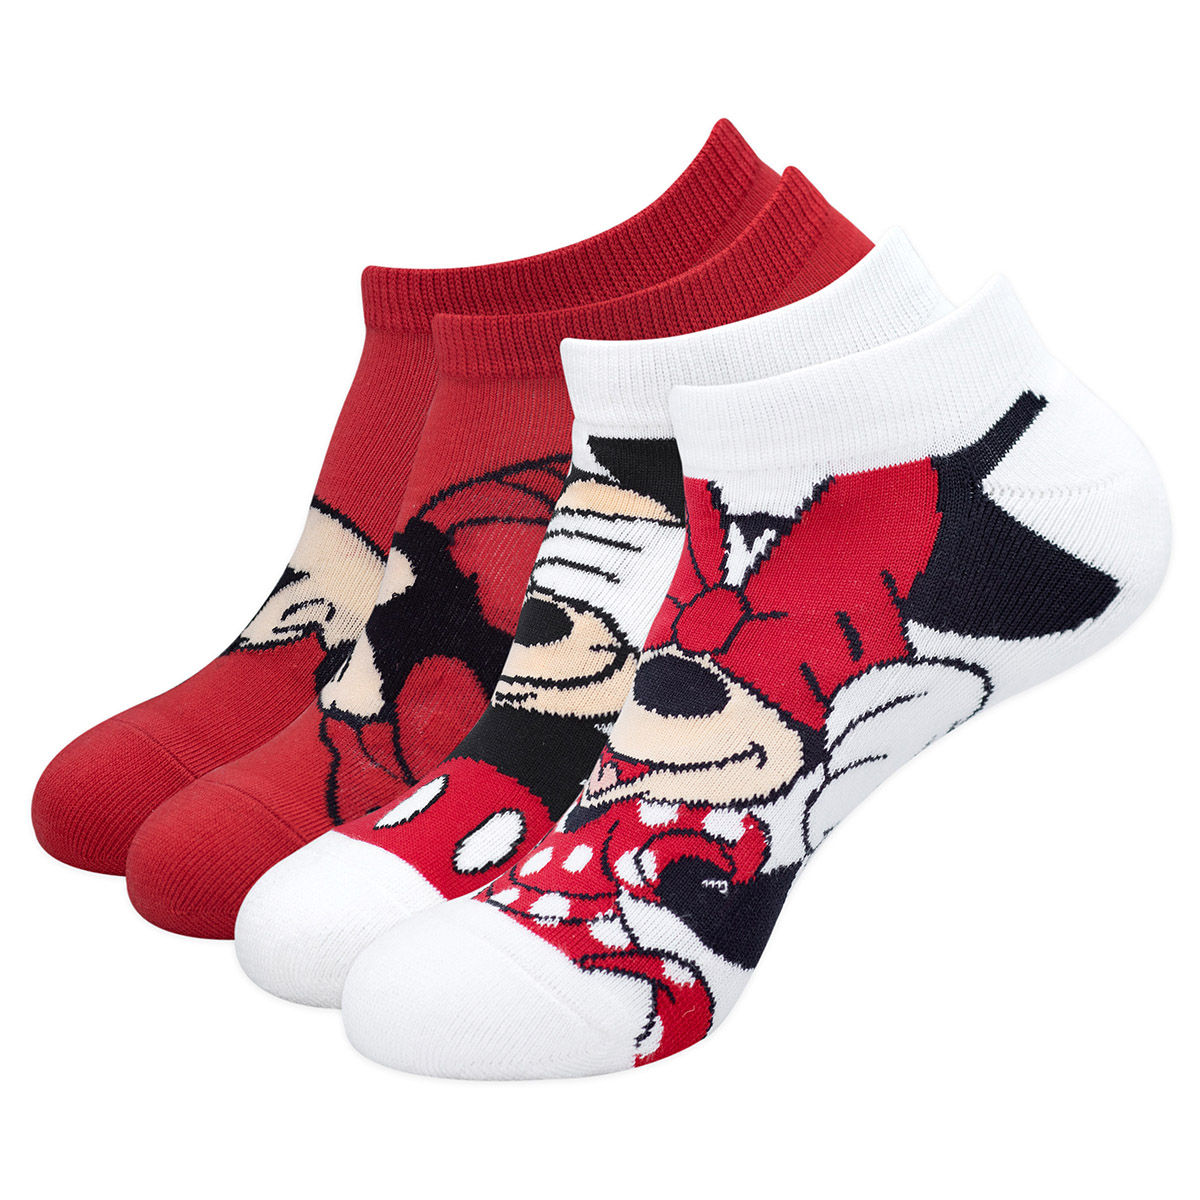 Disney Womens Minnie Mouse No Show Ankle Socks 10 Pair Pack Multi-Color 